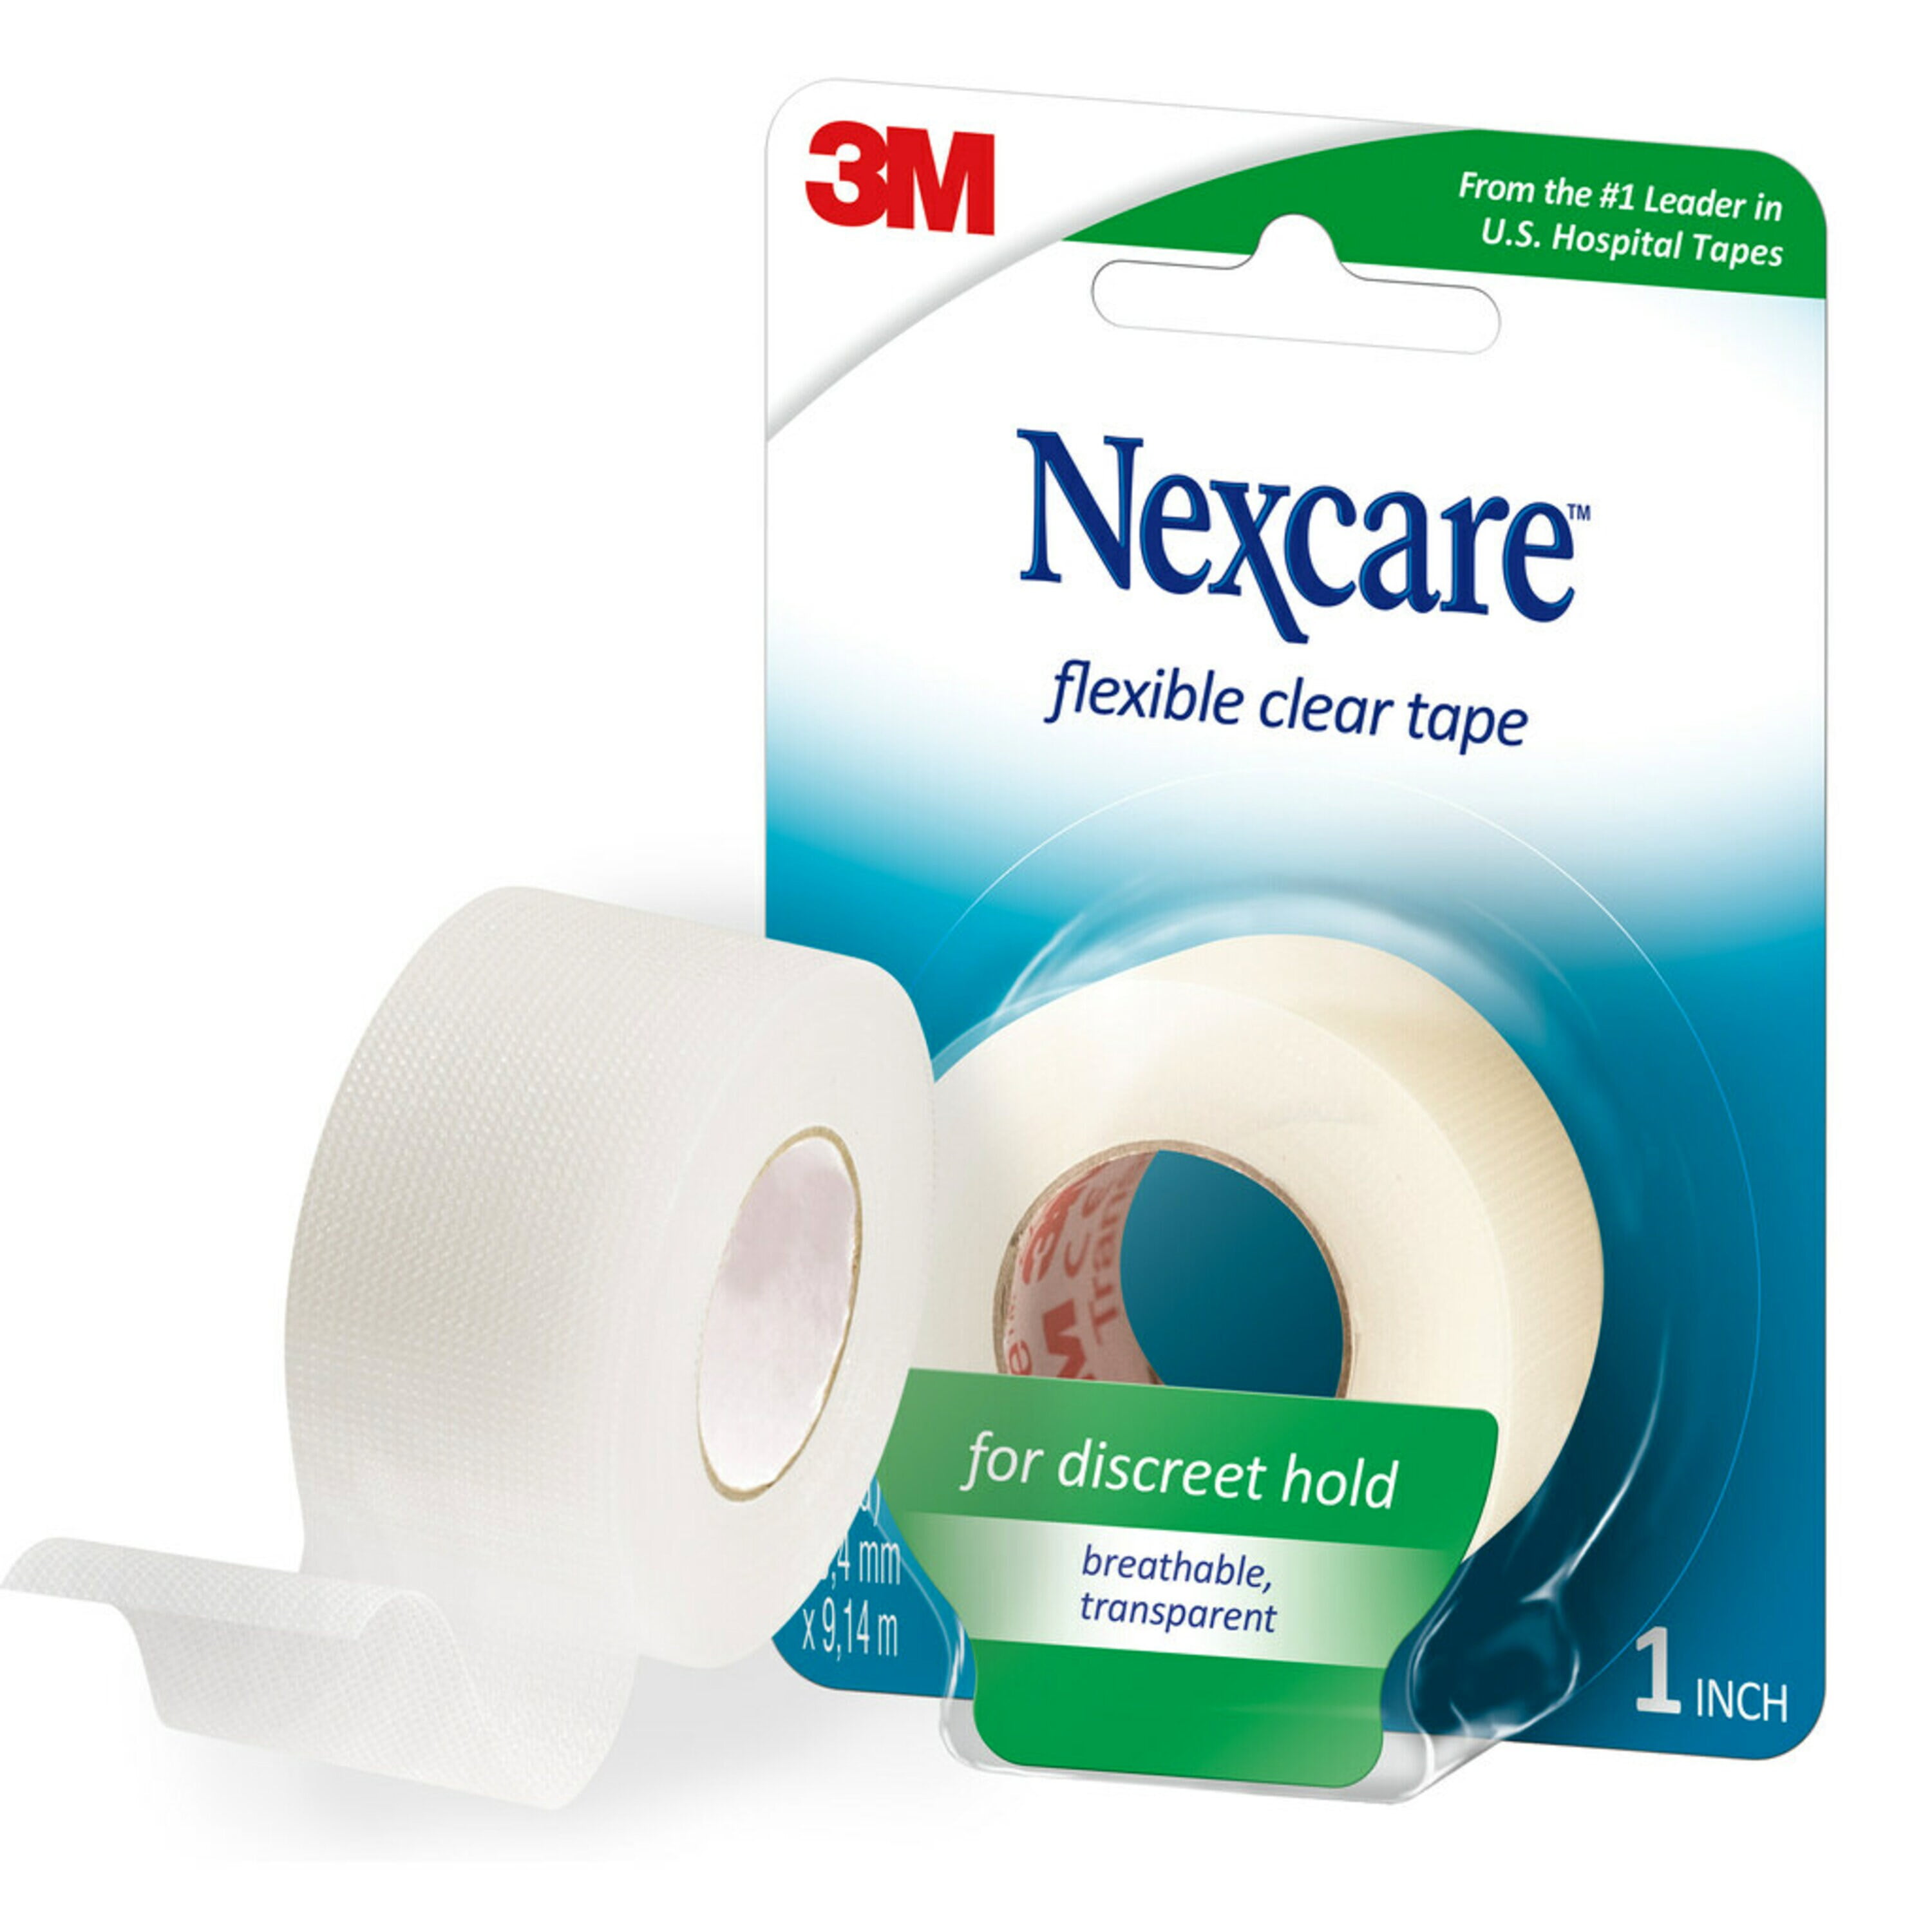 Nexcare Gentle Paper Tape Dispenser – Flexible Clear Tape - CTC Health